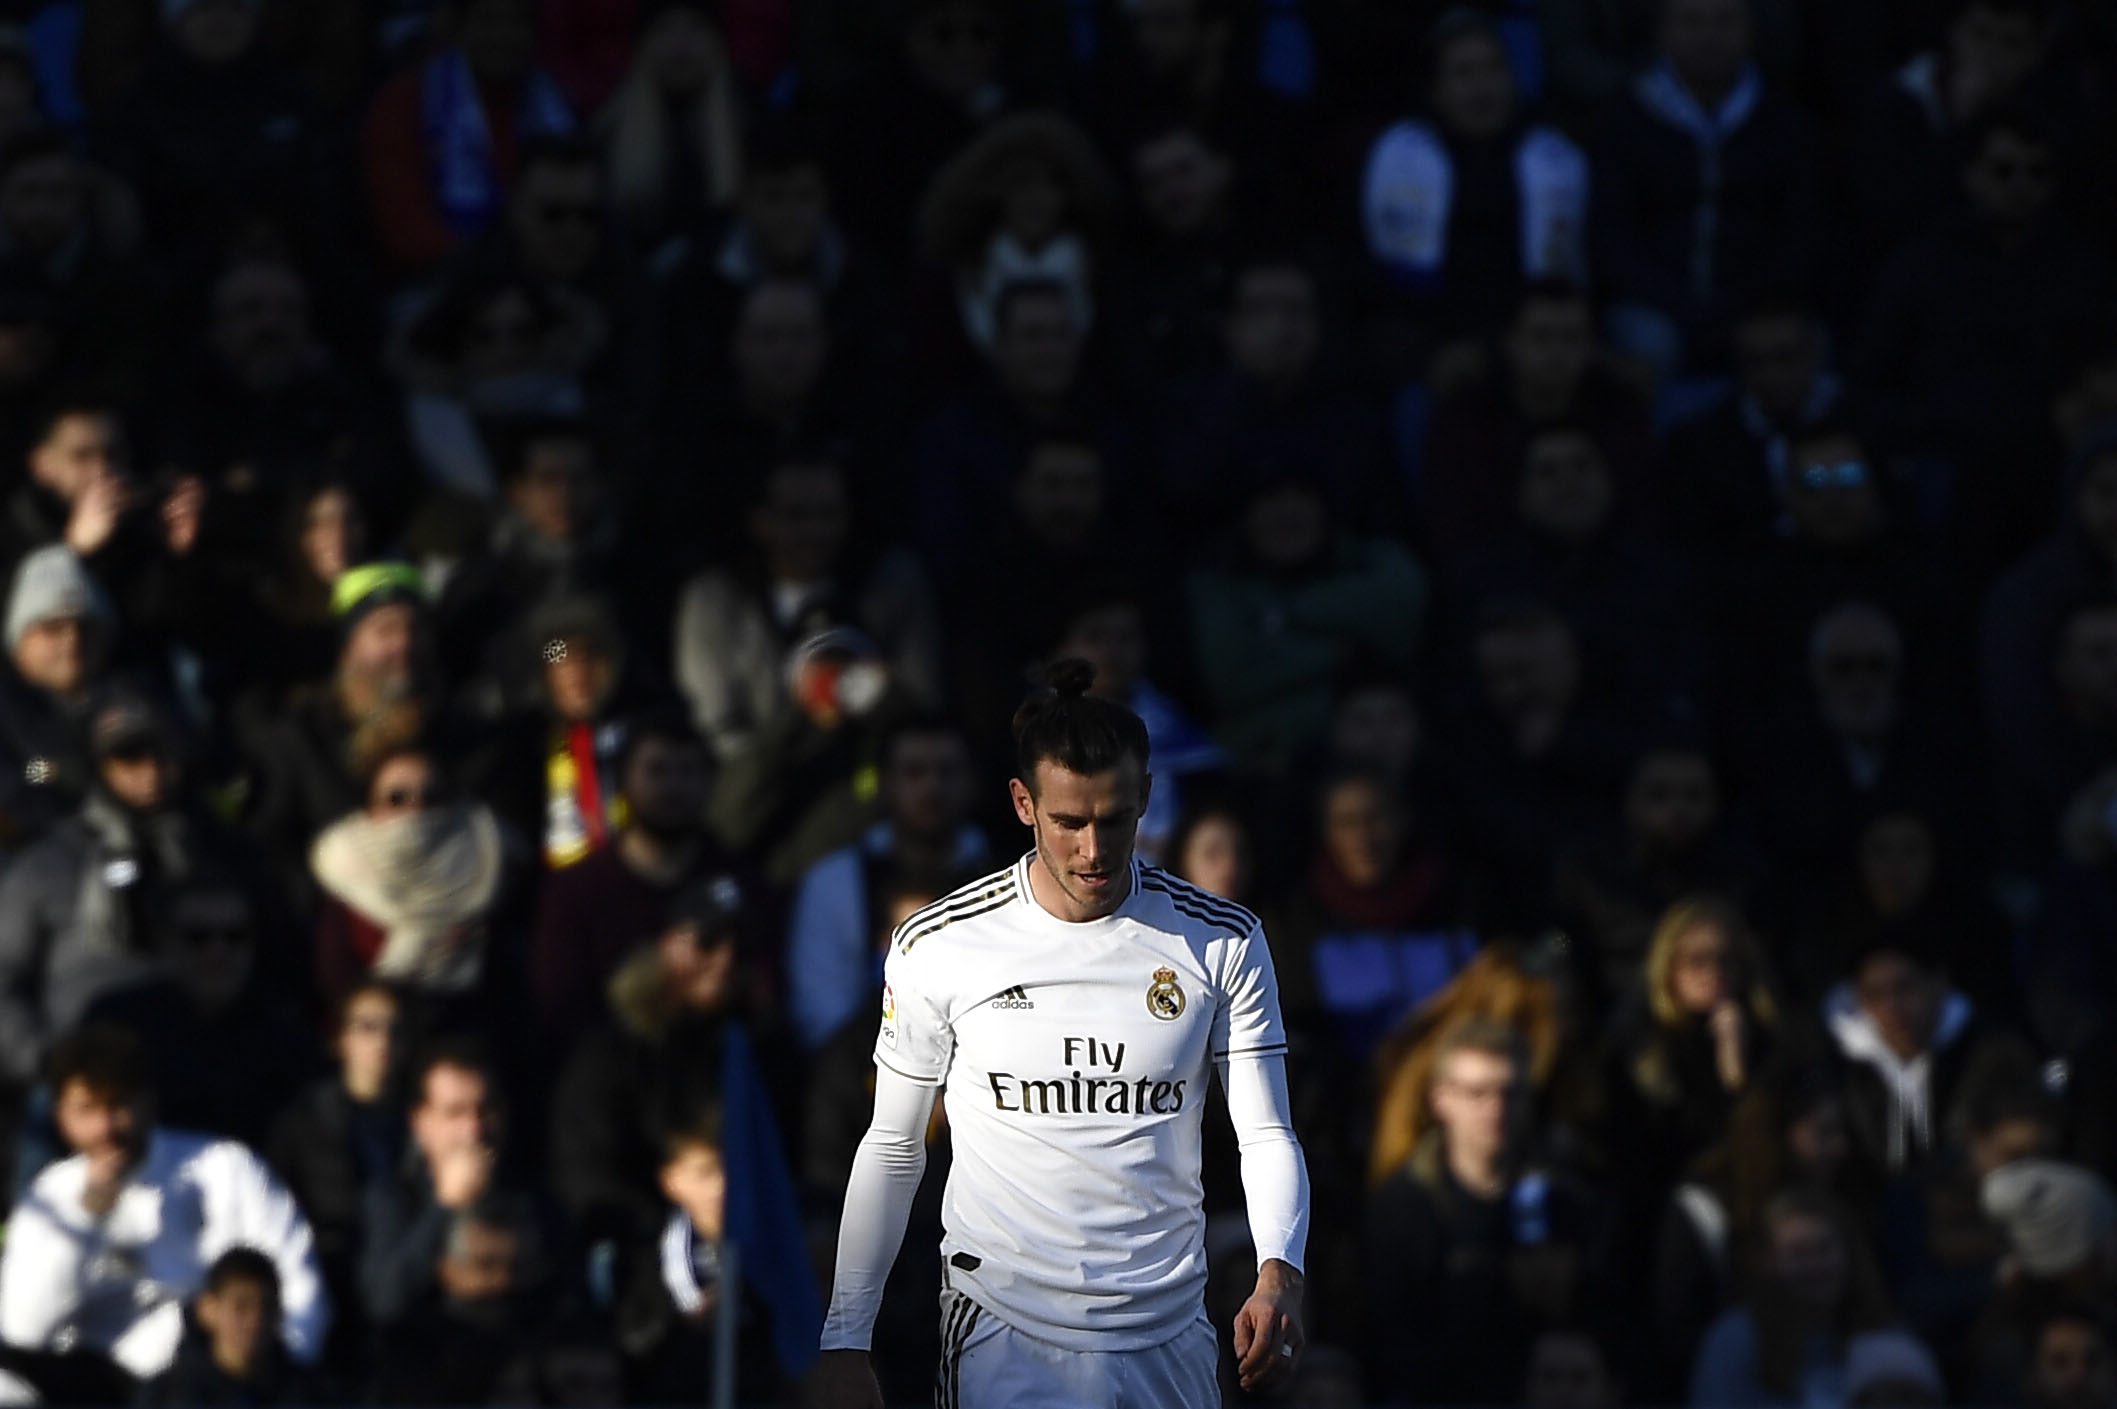 Real Madrid's Welsh forward Gareth Bale walks on the pitch during the Spanish league football match between Getafe CF and Real Madrid CF at the Col. Alfonso Perez stadium in Getafe on January 4, 2020. (Photo by OSCAR DEL POZO / AFP)